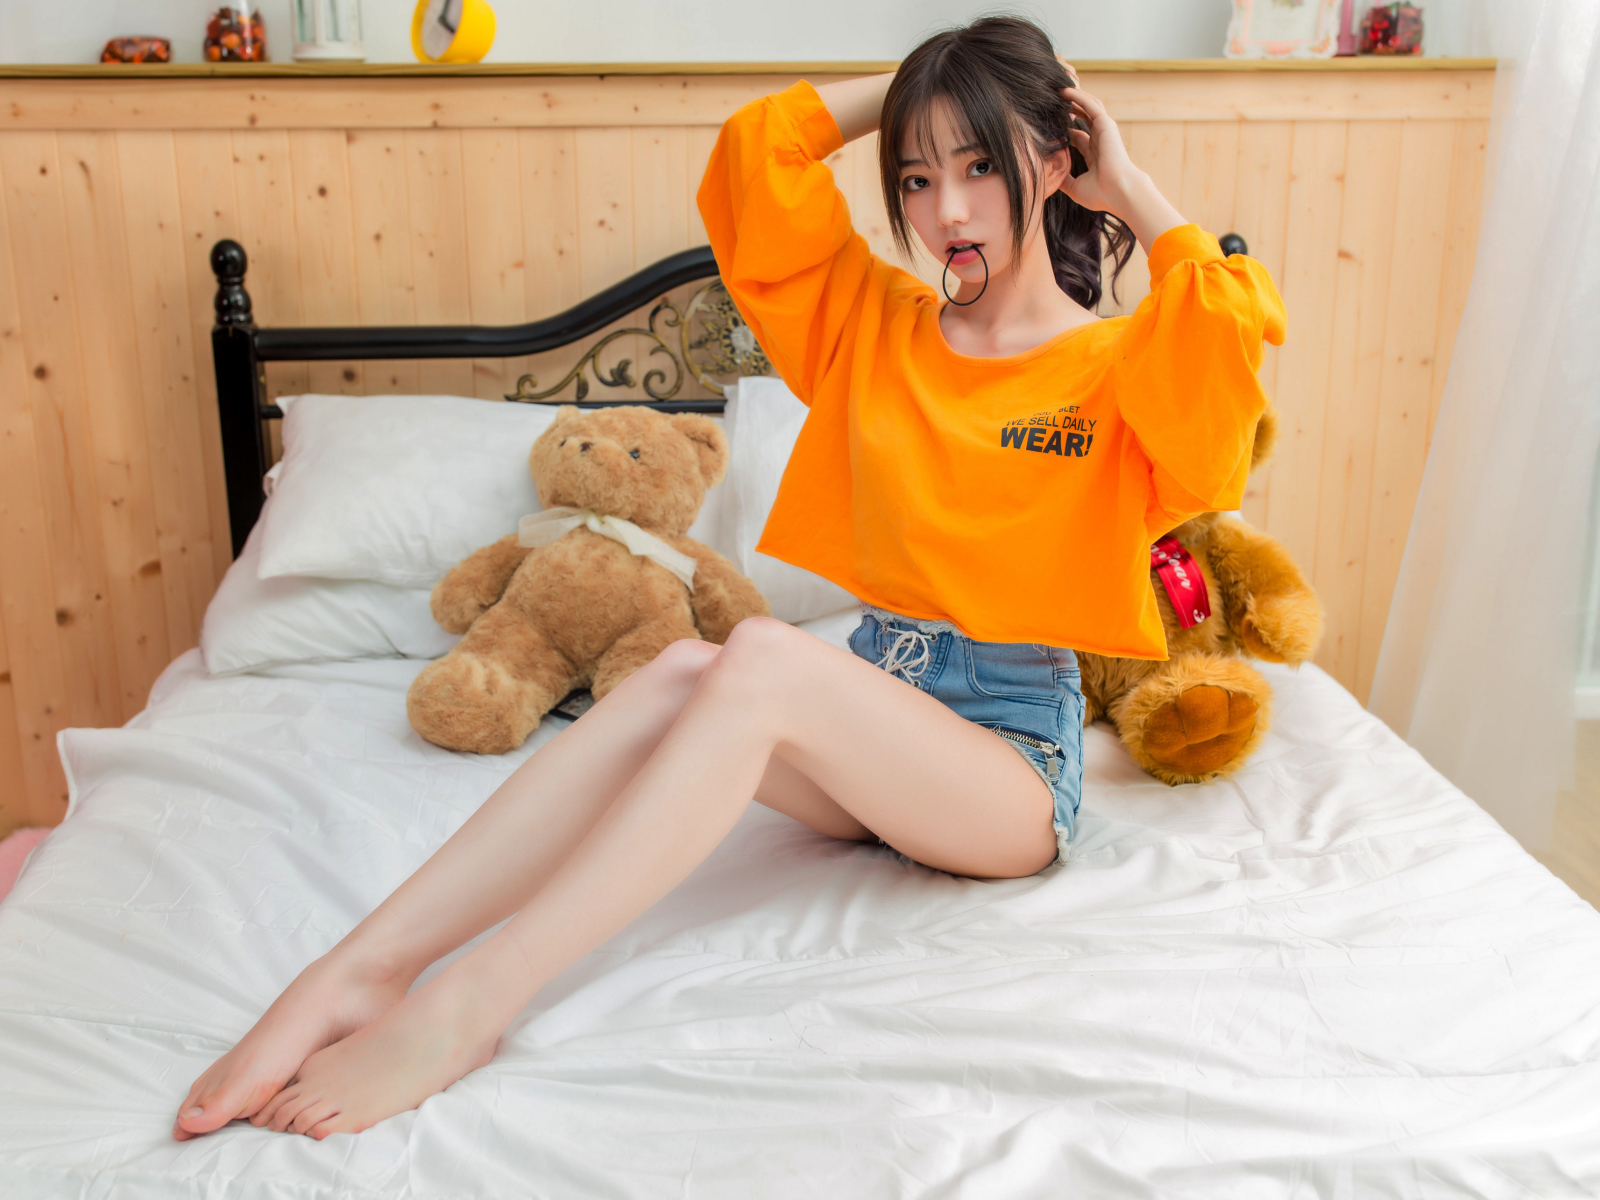 Asian girl on the bed with toys